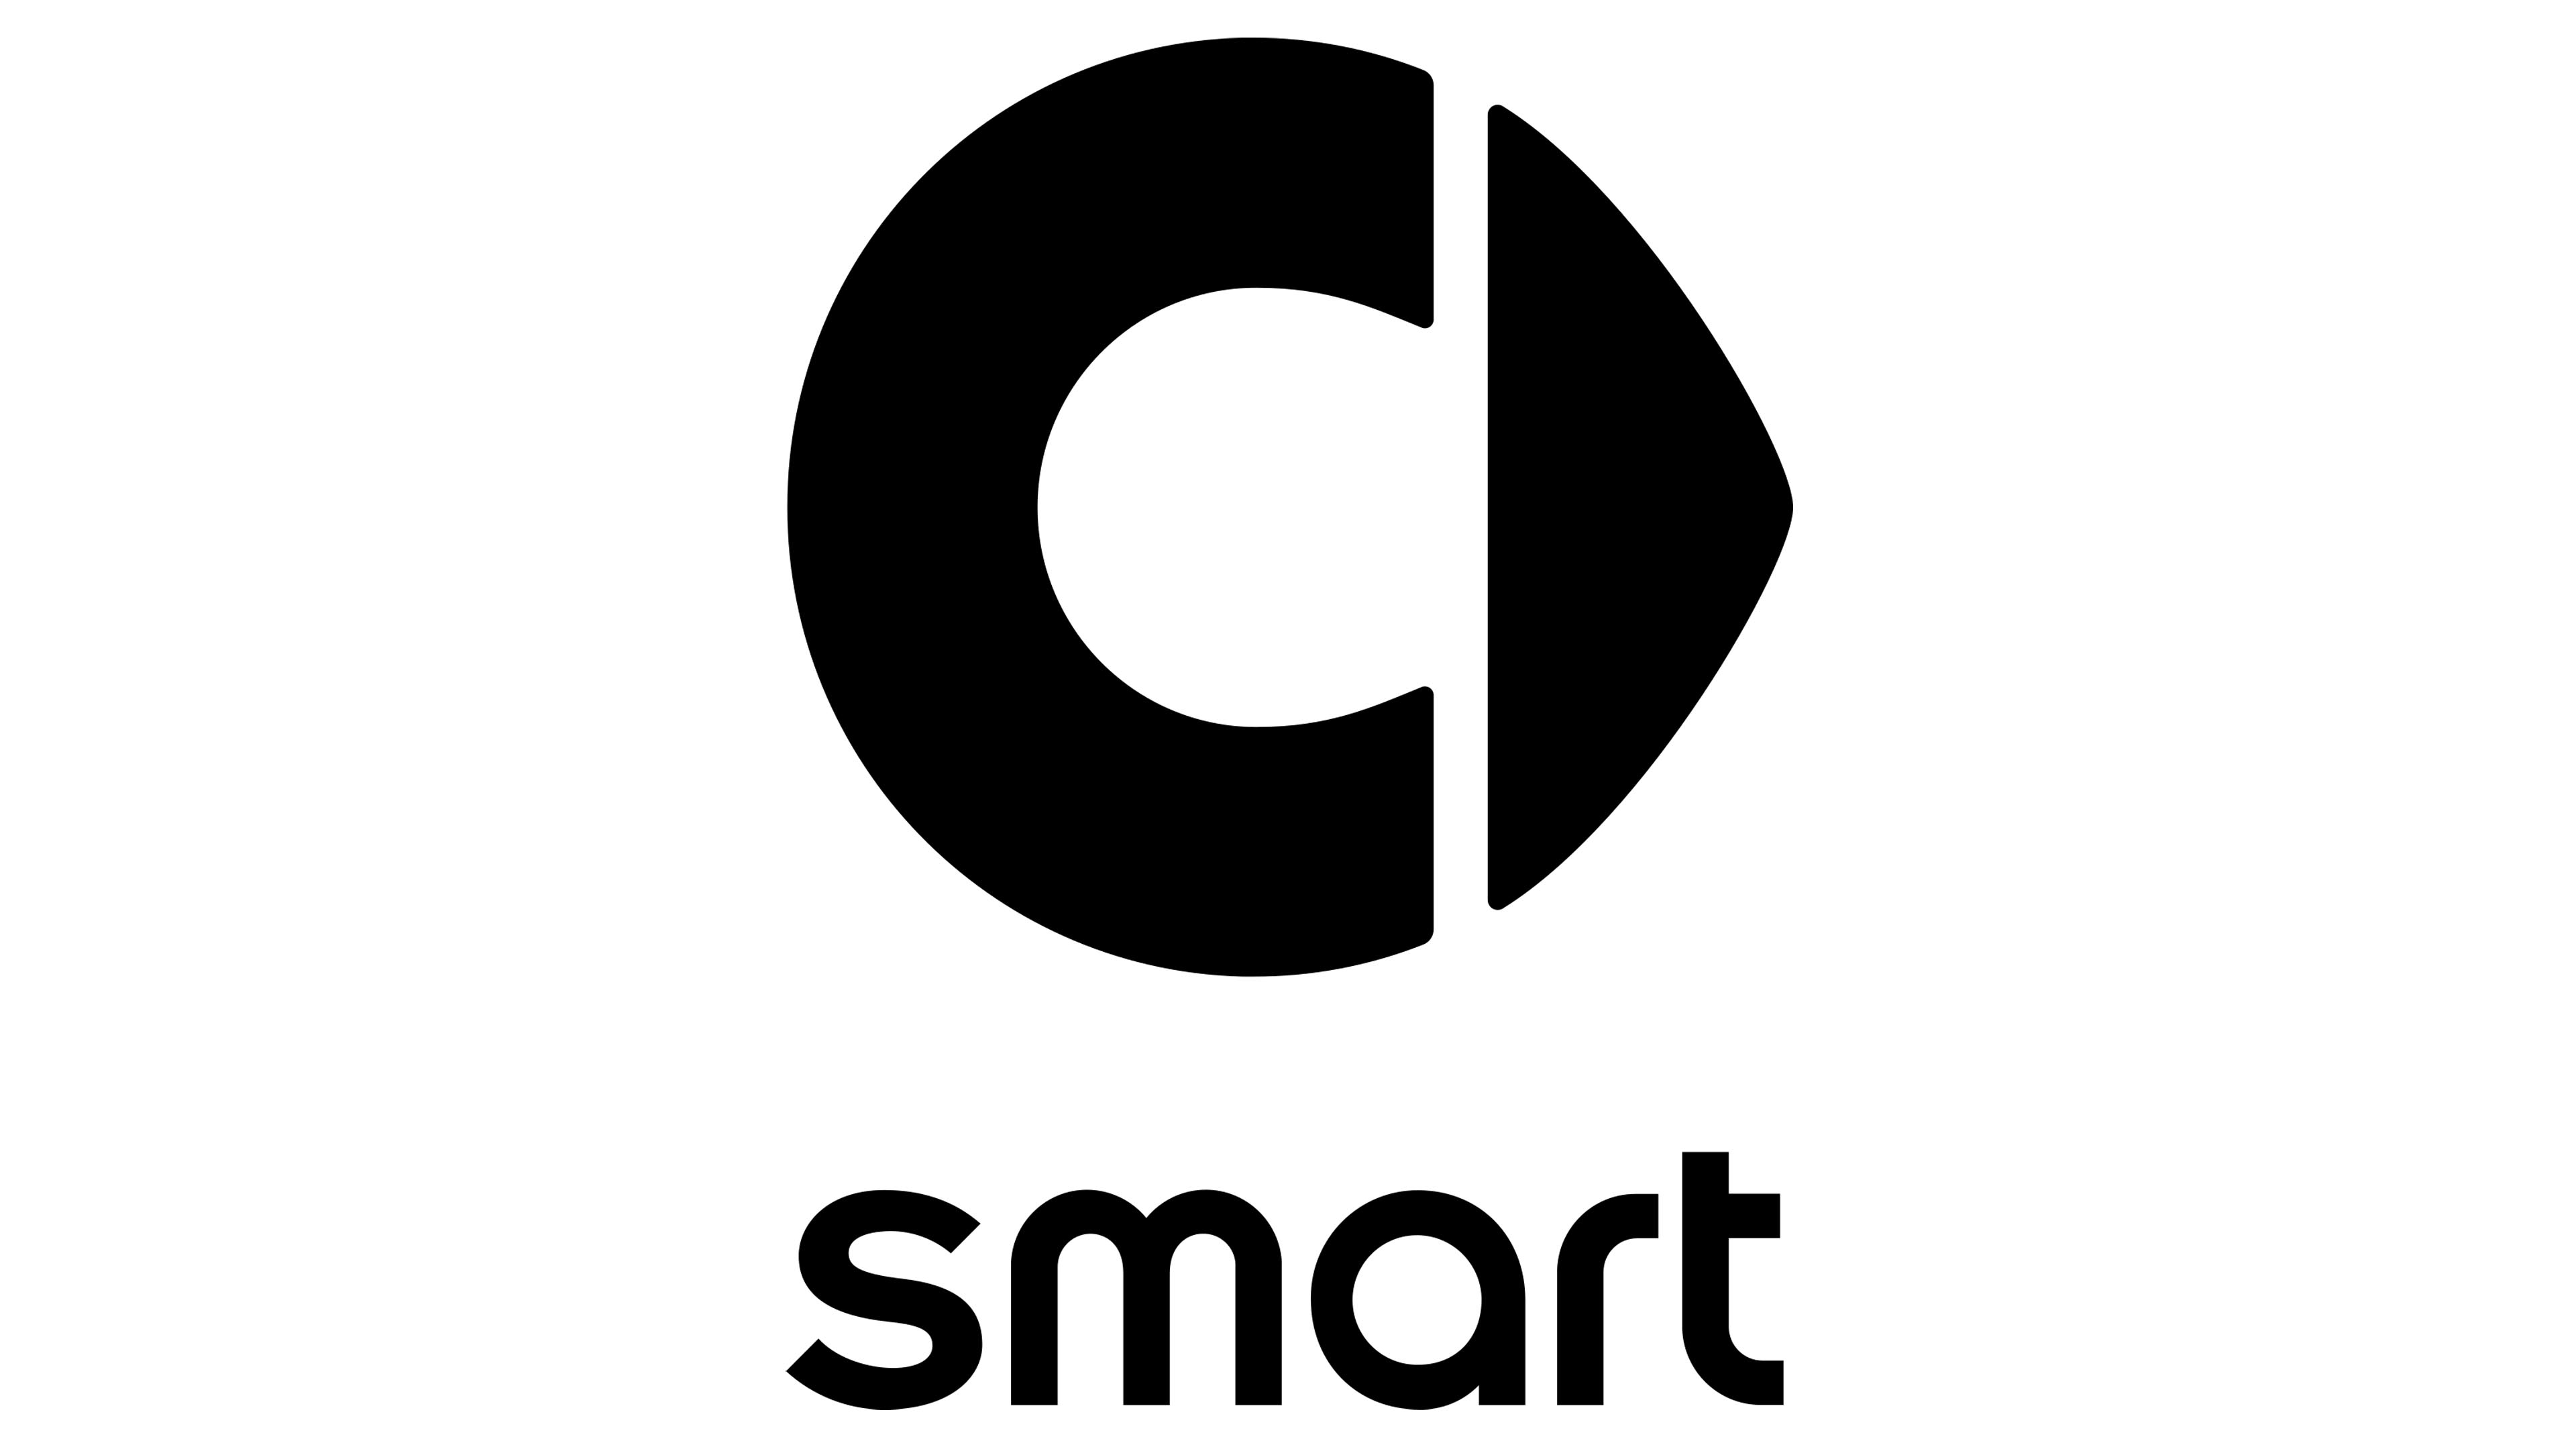 smart Logo and Car Symbol Meaning